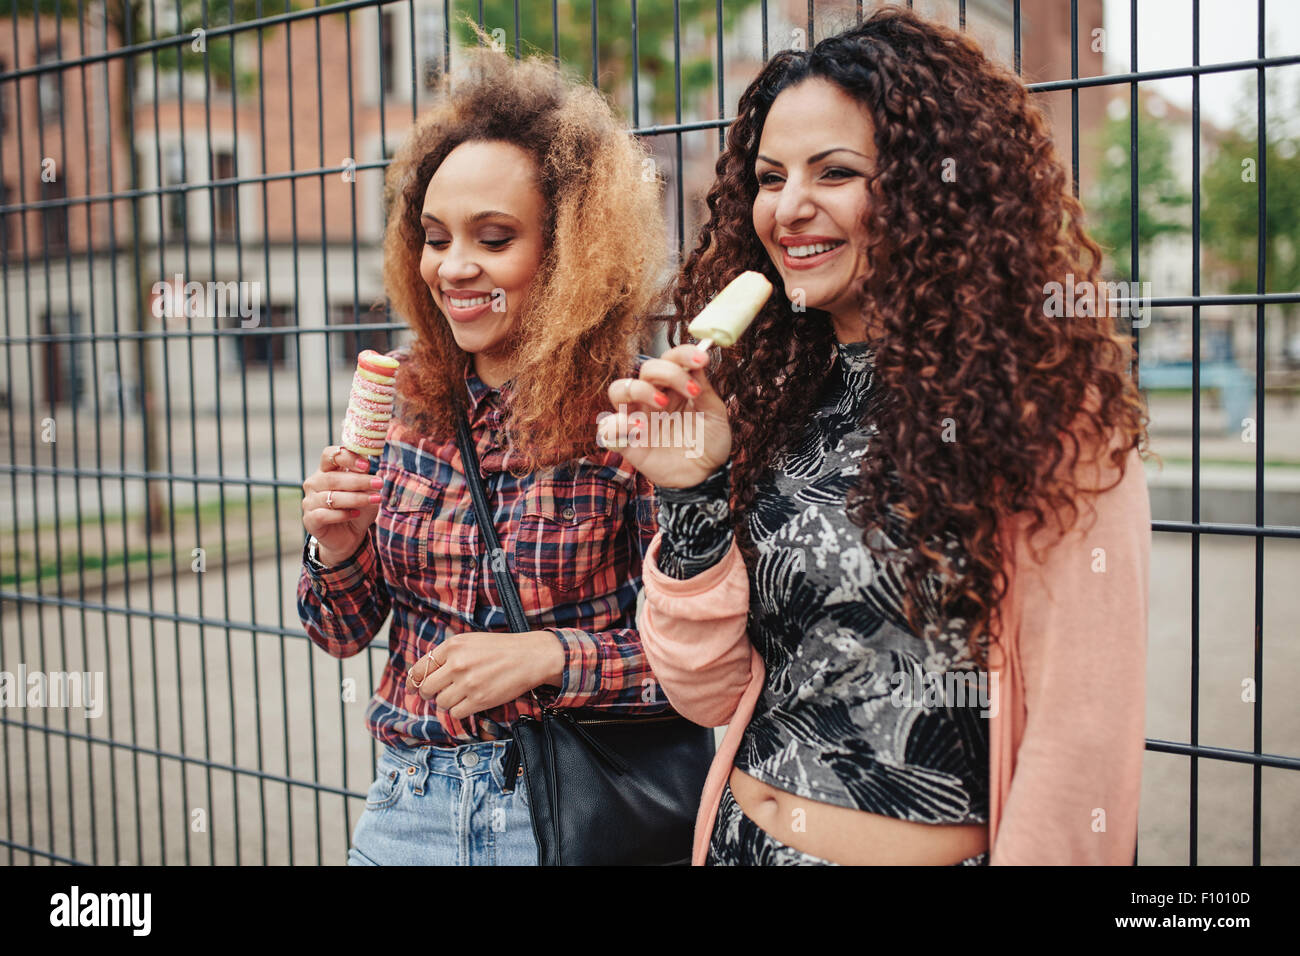 Cheerful young girls eating candy ice cream. Two young women standing against a fence smiling, outdoors. Stock Photo